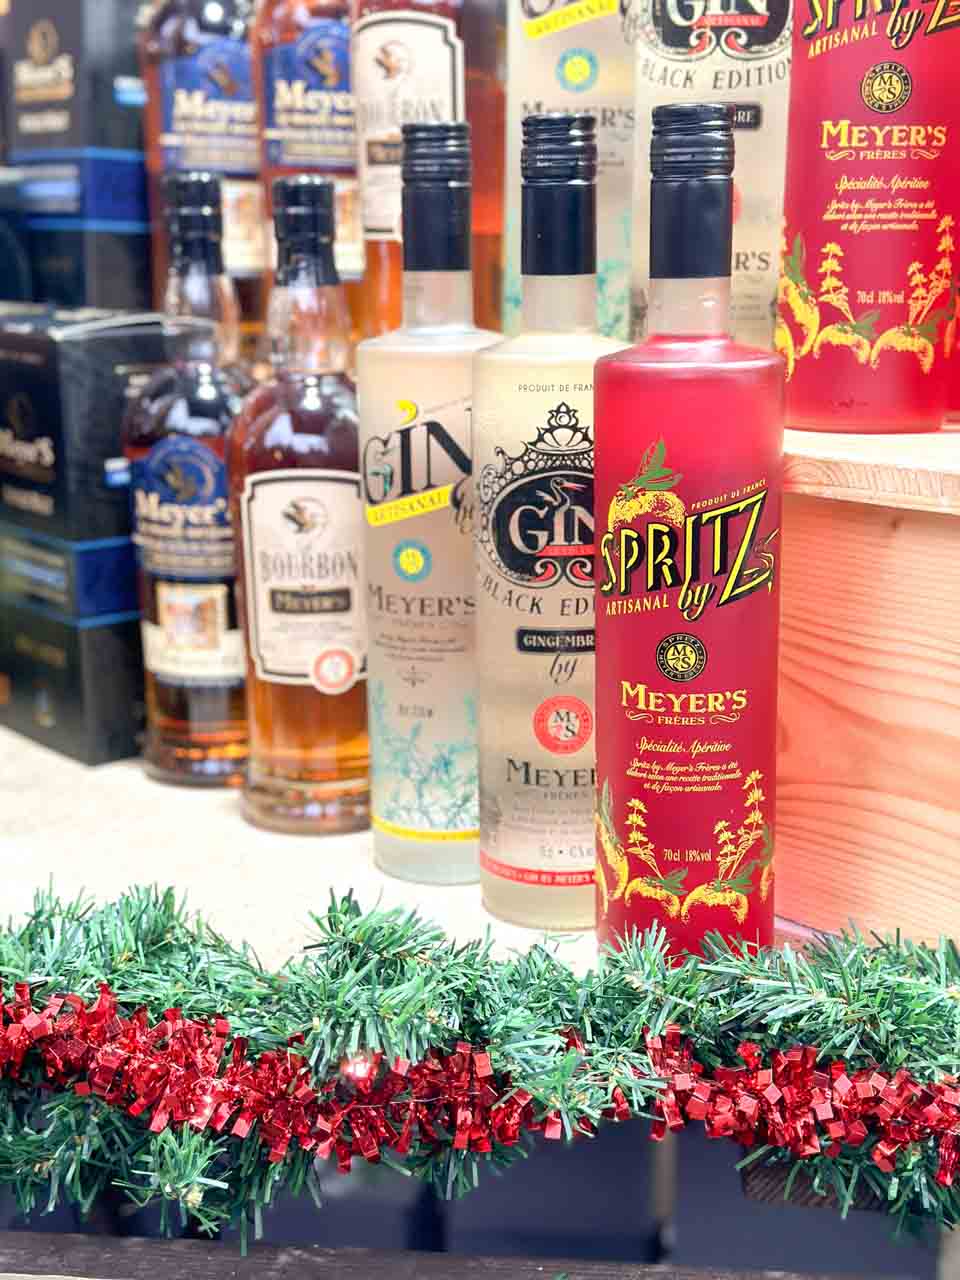 A selection of artisanal spirits and liqueurs, including gin and a bright pink 'Spritz' by Meyer's, displayed among festive garlands at the Colmar Christmas market